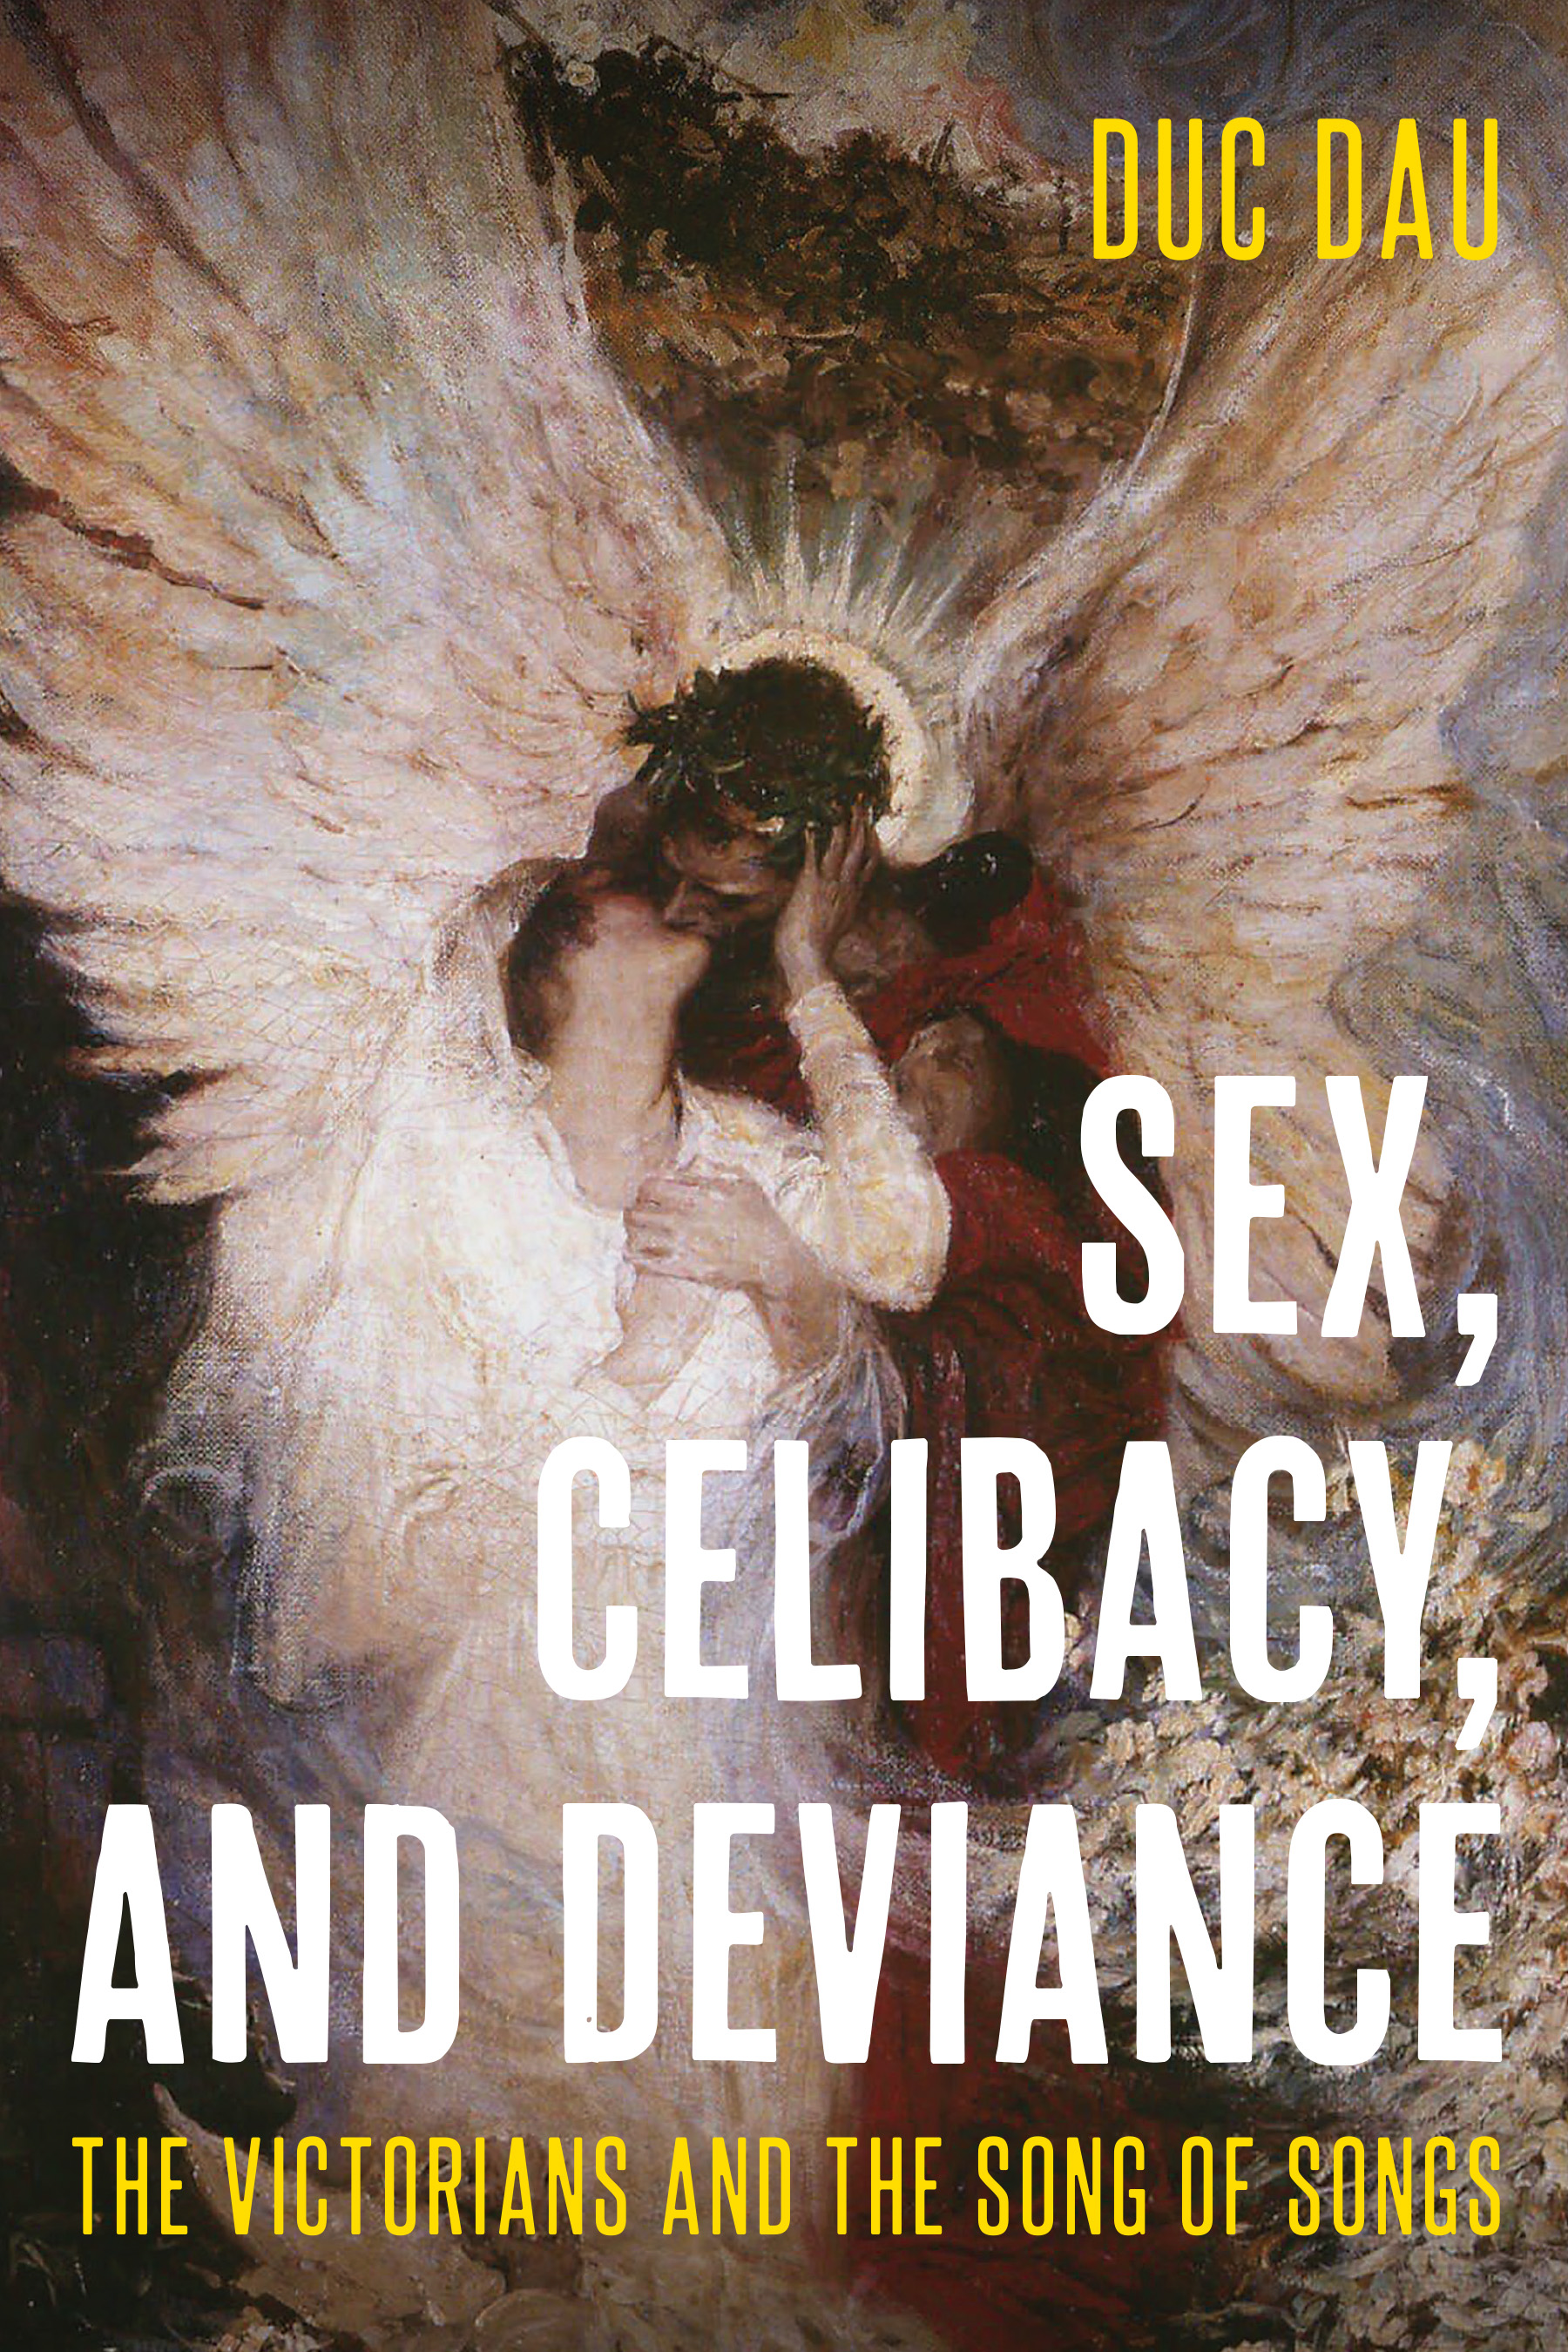 Front cover of Sex, Celibacy, and Deviance: The Victorians and the Song of Songs by Duc Dau, featuring a painting of an angel with wings spread as he kisses a woman.